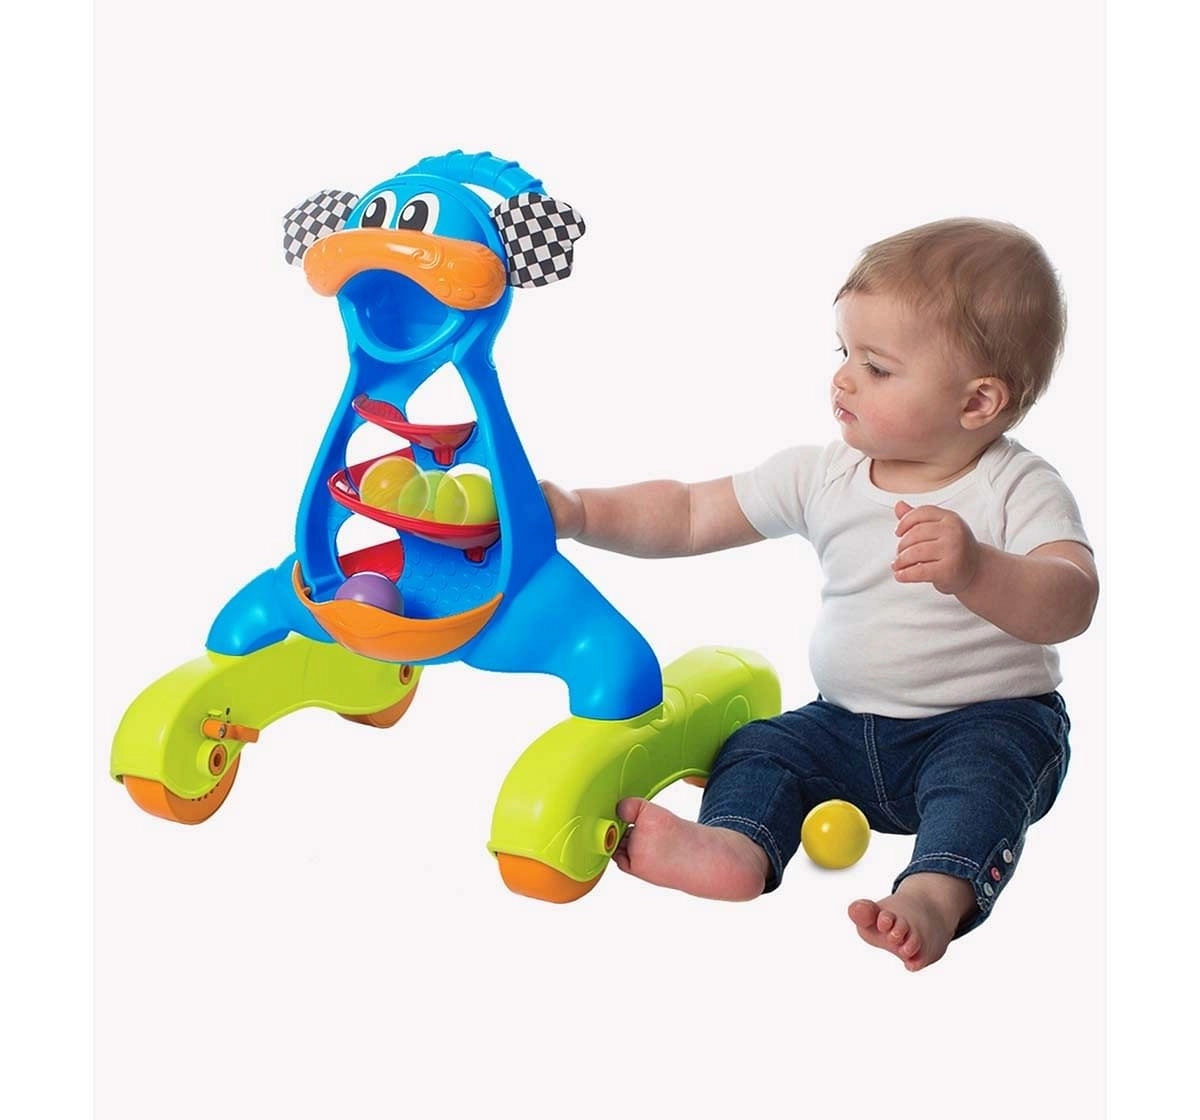 Playgro Walk With Me Blue Dragon Activity Walker Baby Gear for Kids age 12M+